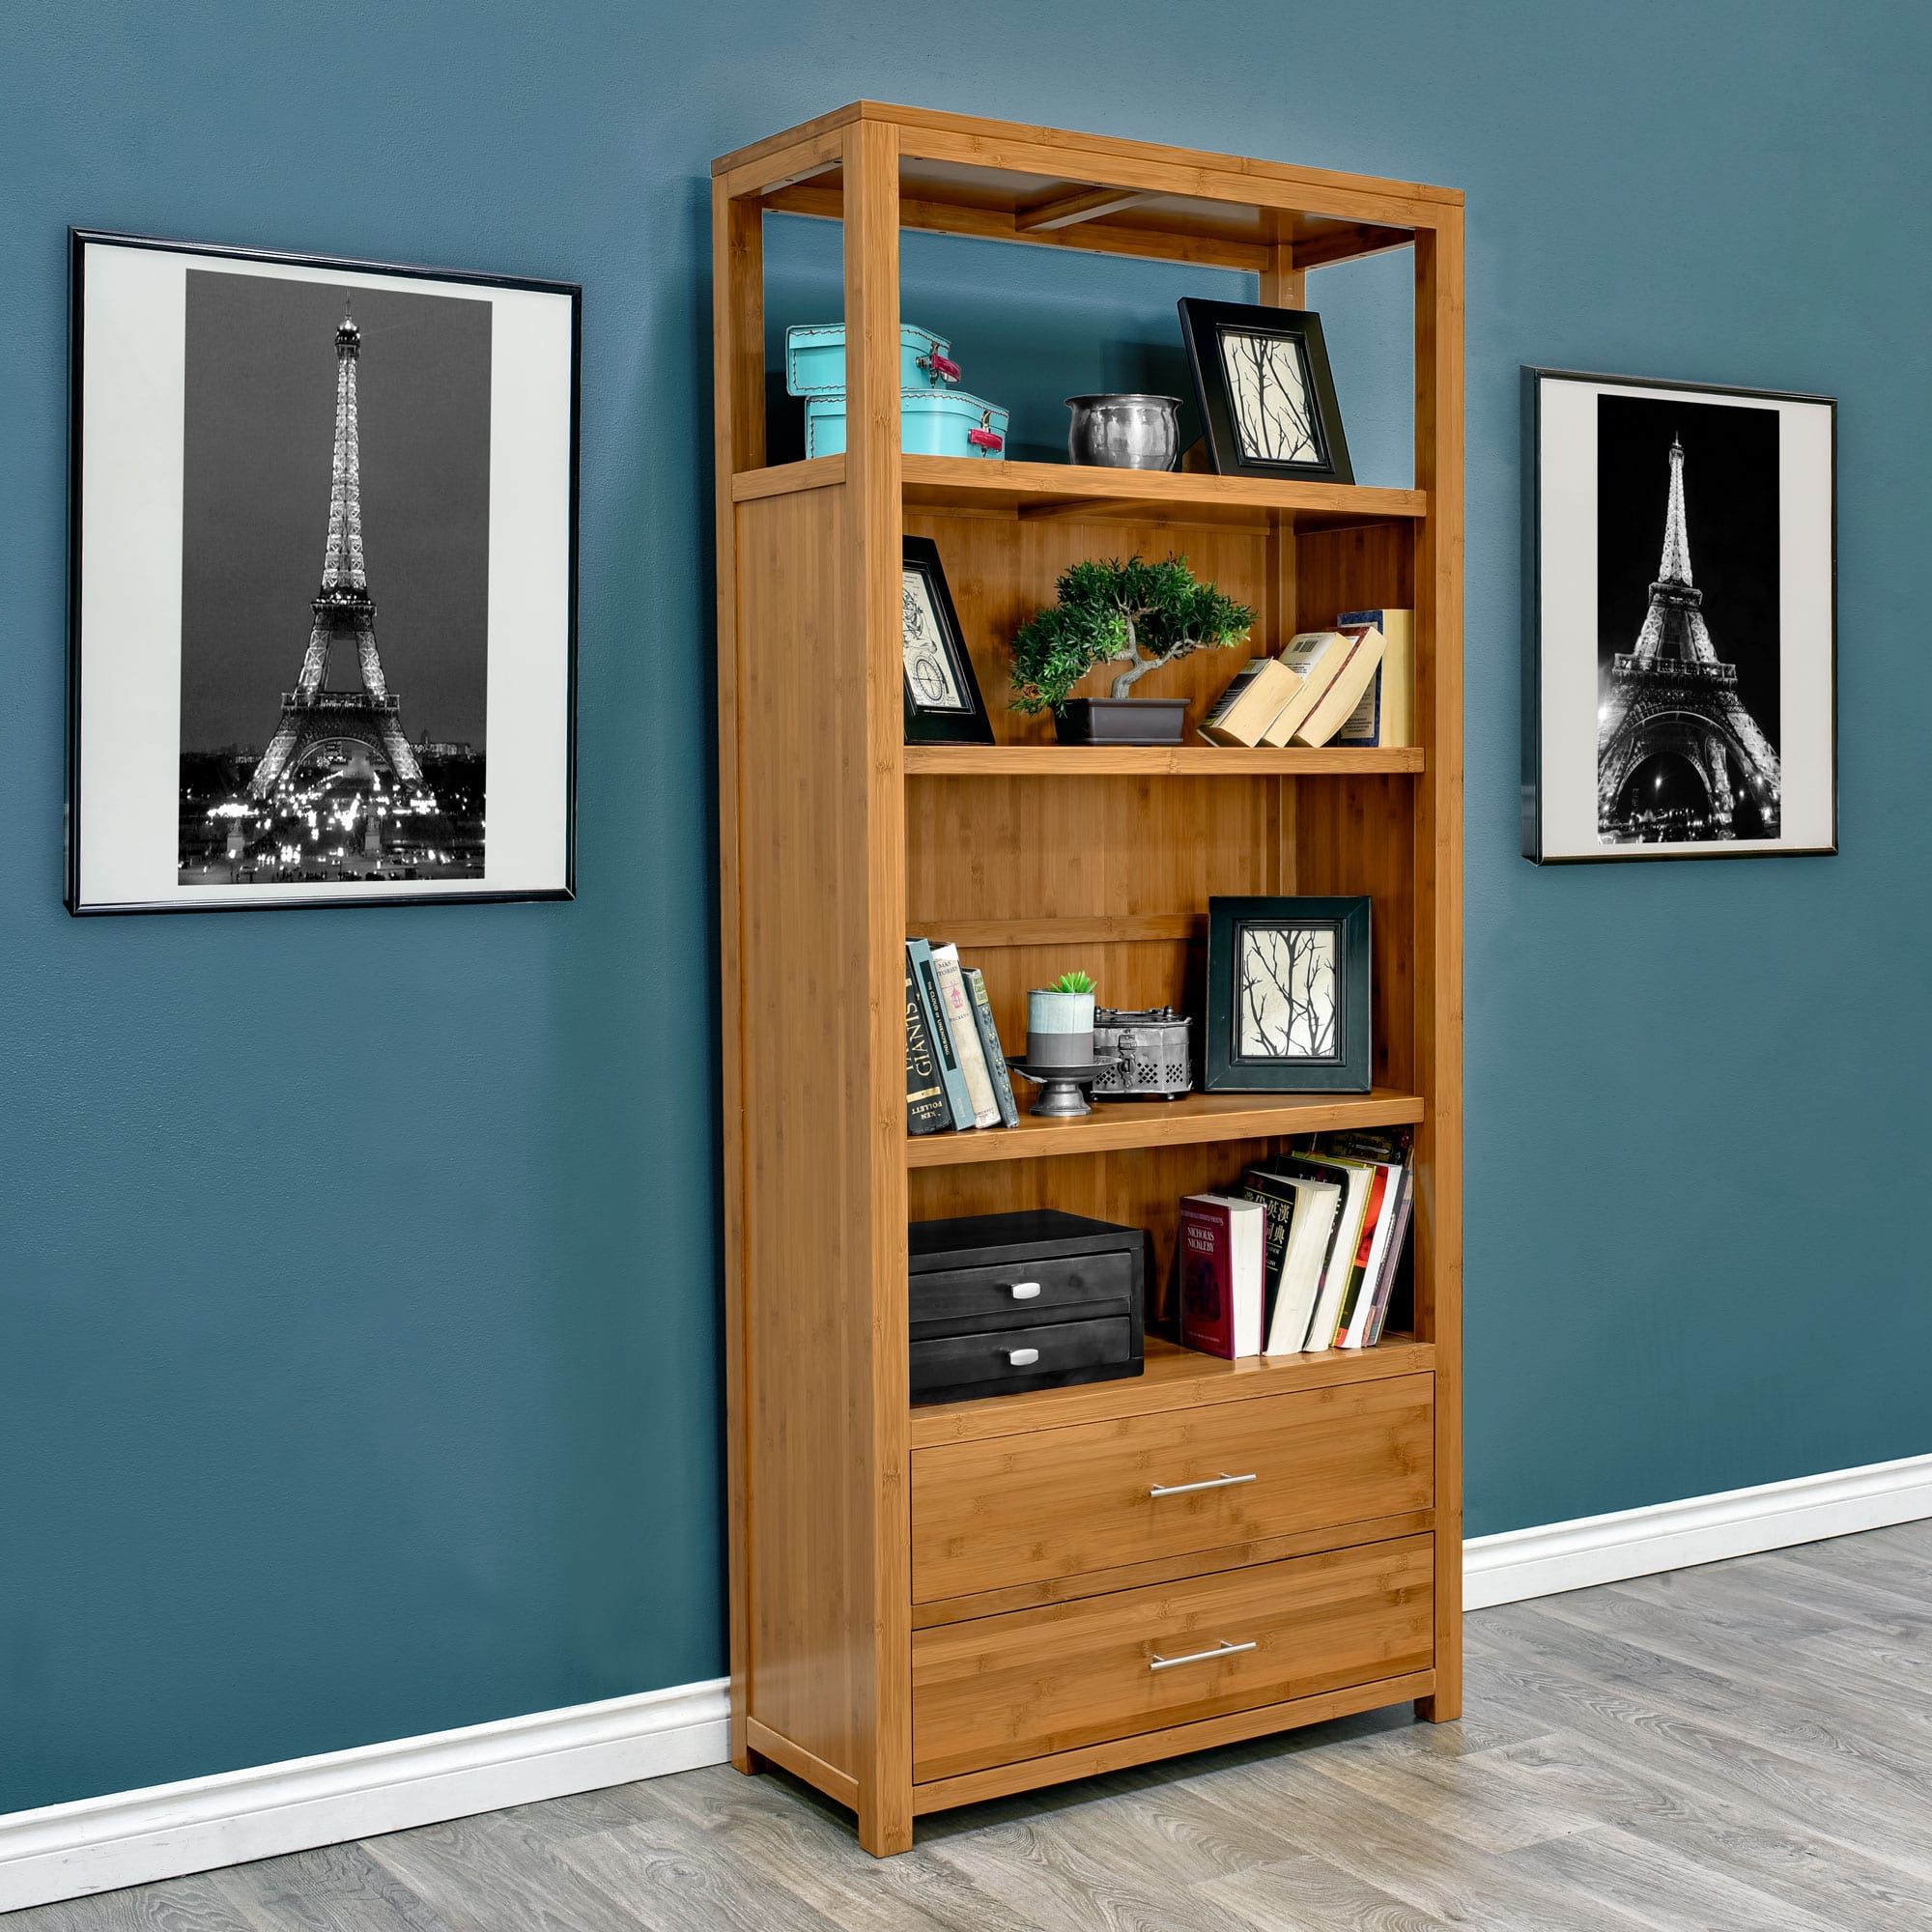 Niko 76" Bamboo 2 Drawer Bookcase | Epoch Design For Bookcases With Drawer (View 9 of 15)